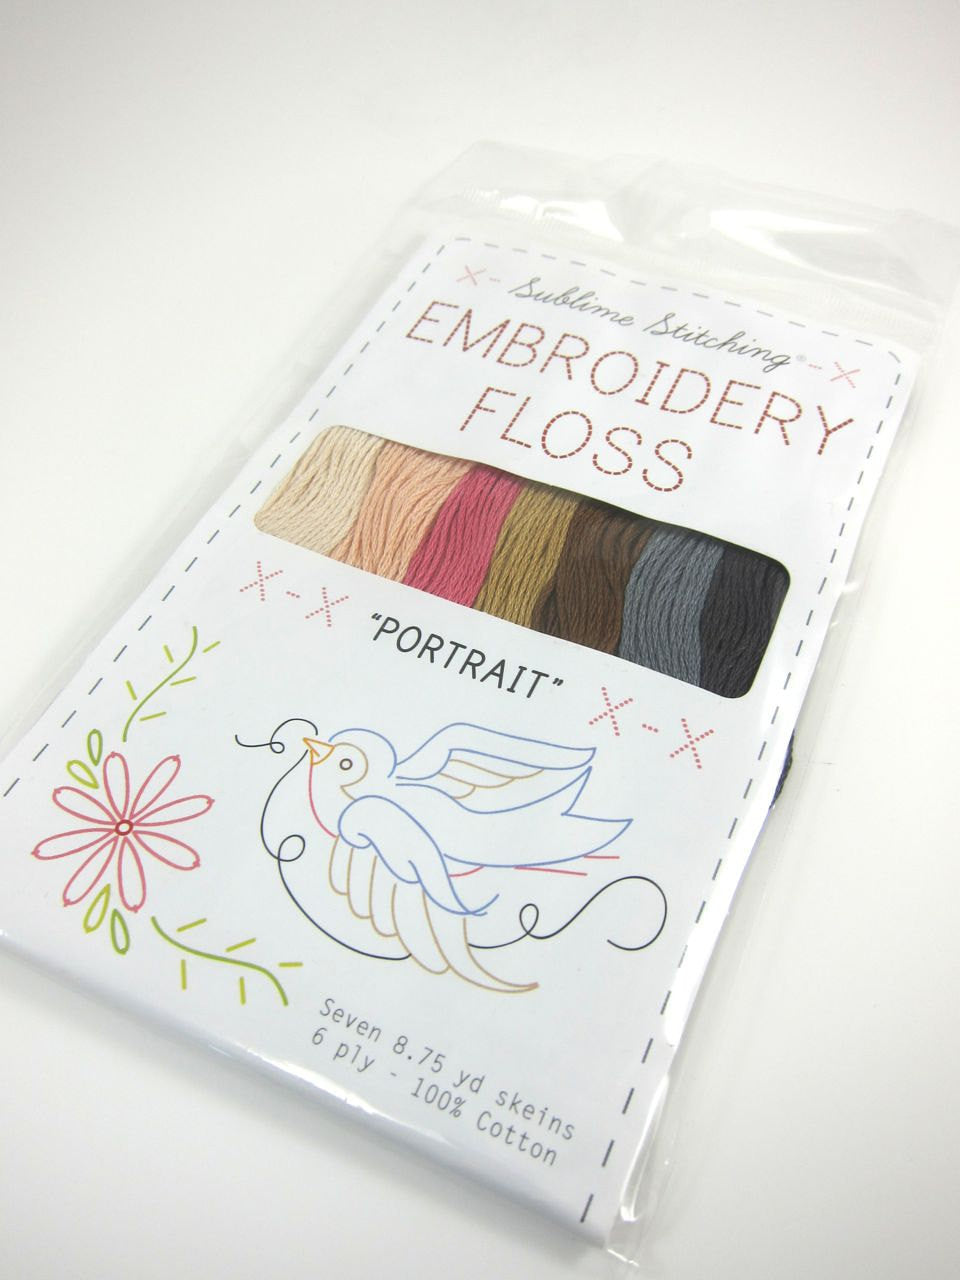 Embroidery Floss Set - Sublime Stitching Portrait Palette Floss - Snuggly Monkey